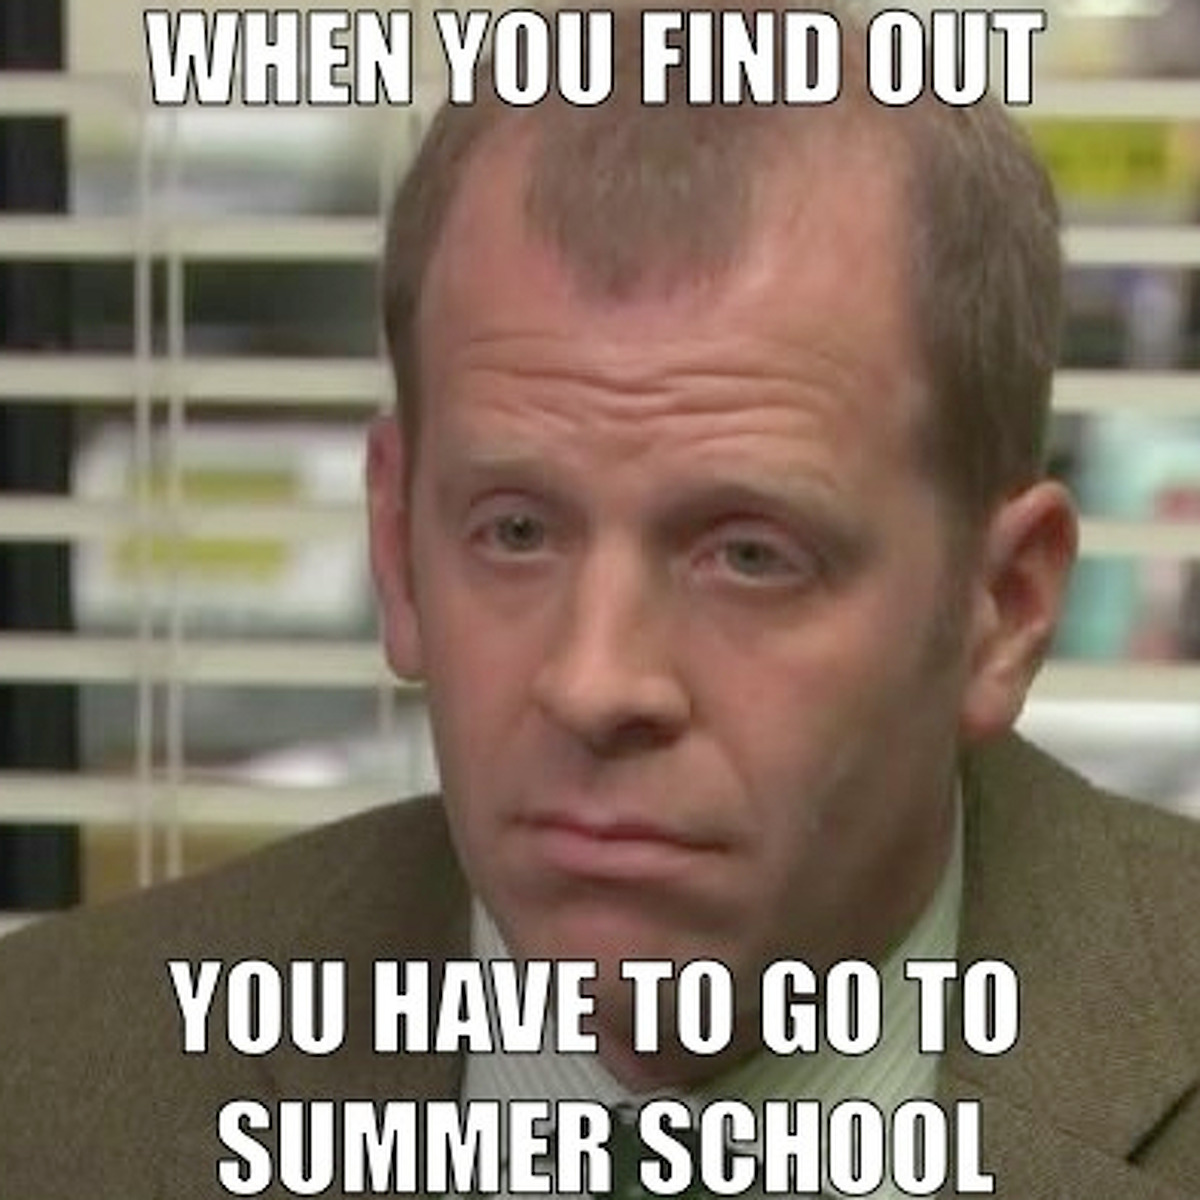 Memes Sum Up How Everyone Feels About The School Year Ending